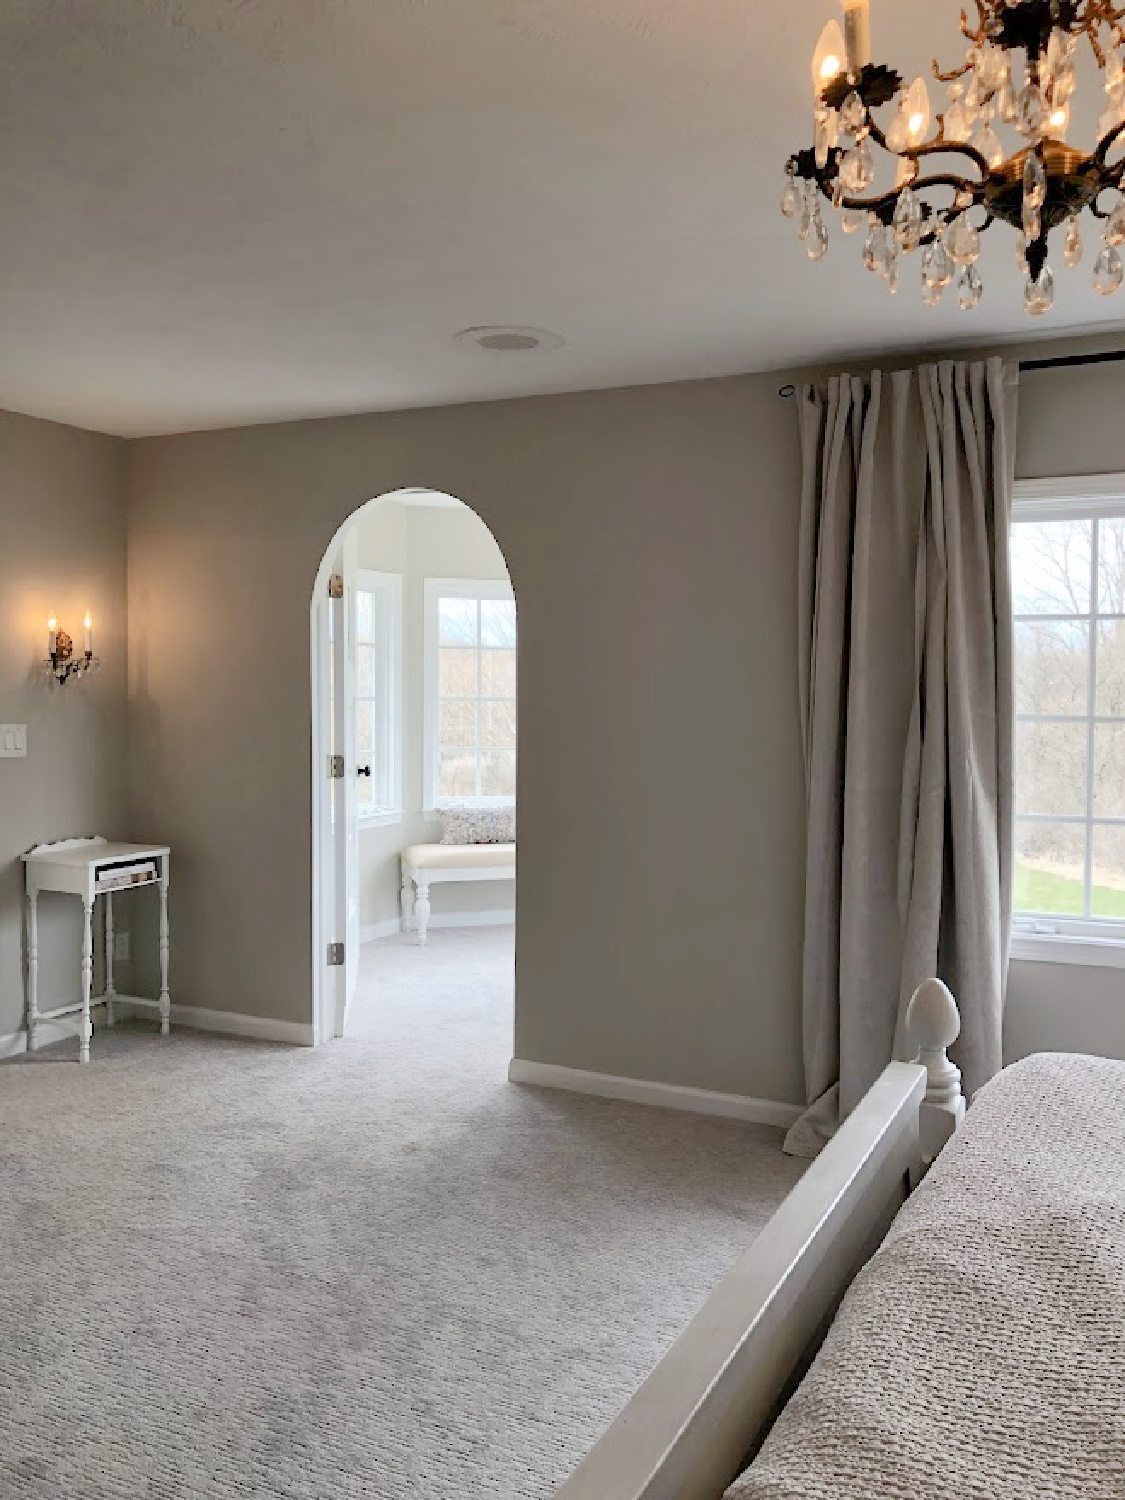 Arched doorway to turret designed sitting room in coastal bedroom remodel (SW Agreeable Gray on walls) at the Georgian - Hello Lovely Studio. #agreeablegray #swagreeablegray